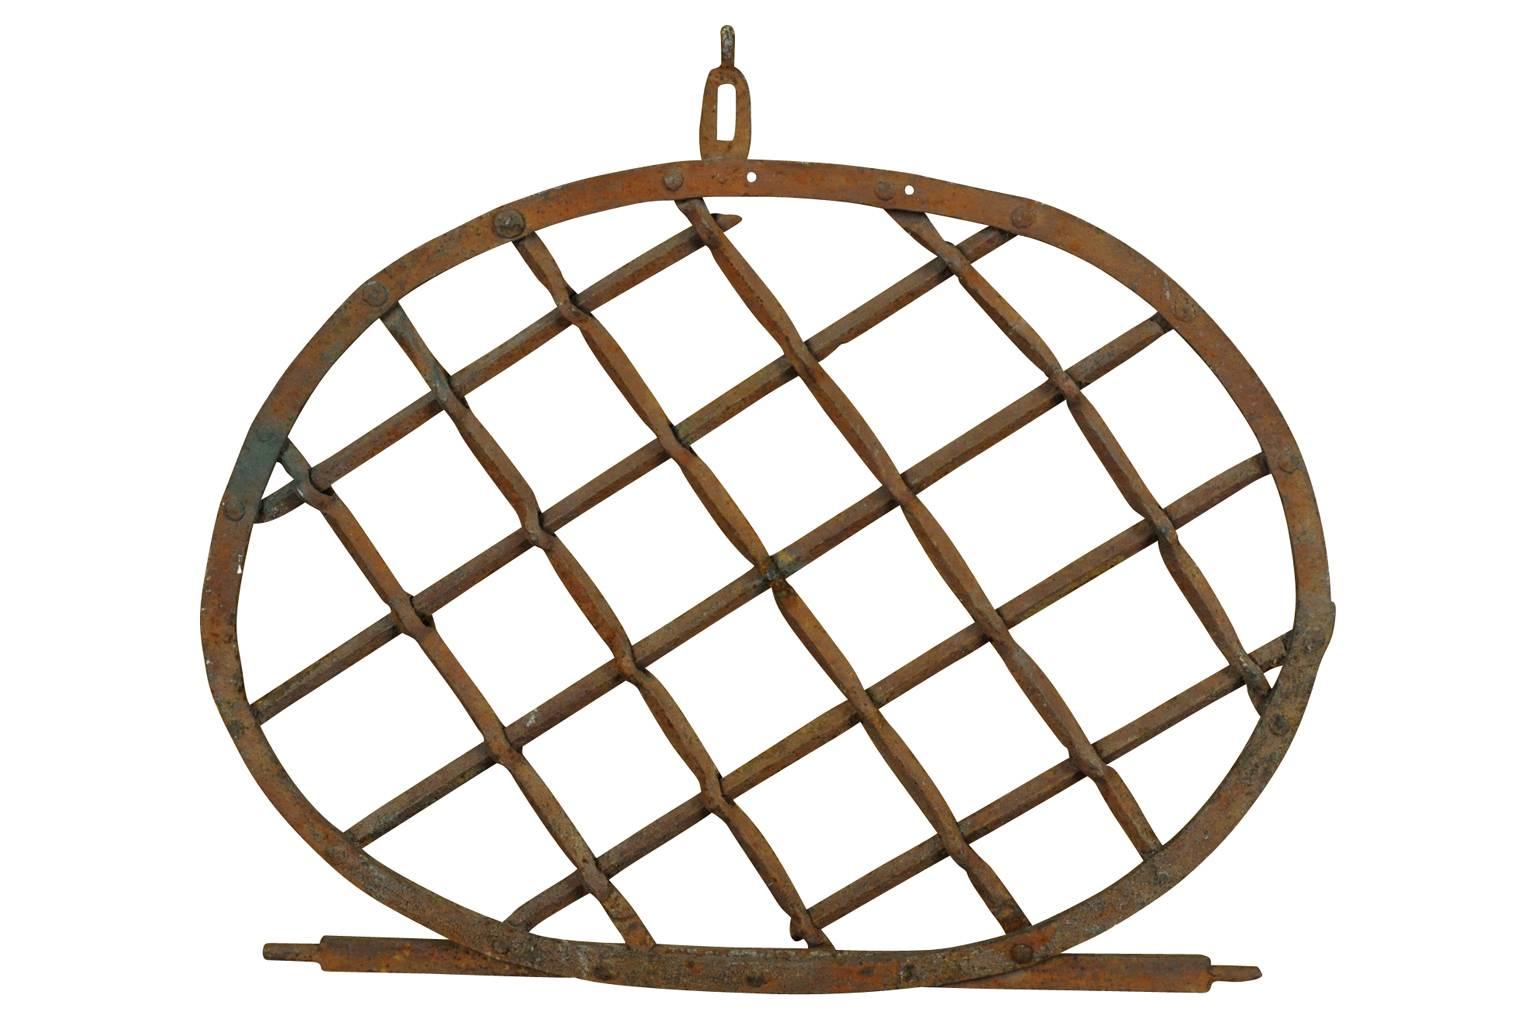 A terrific early 19th century iron window guard. Originally, the window guard would have been hinged to open easily. Wonderful as an architectural wall hanging for an interior of exterior.